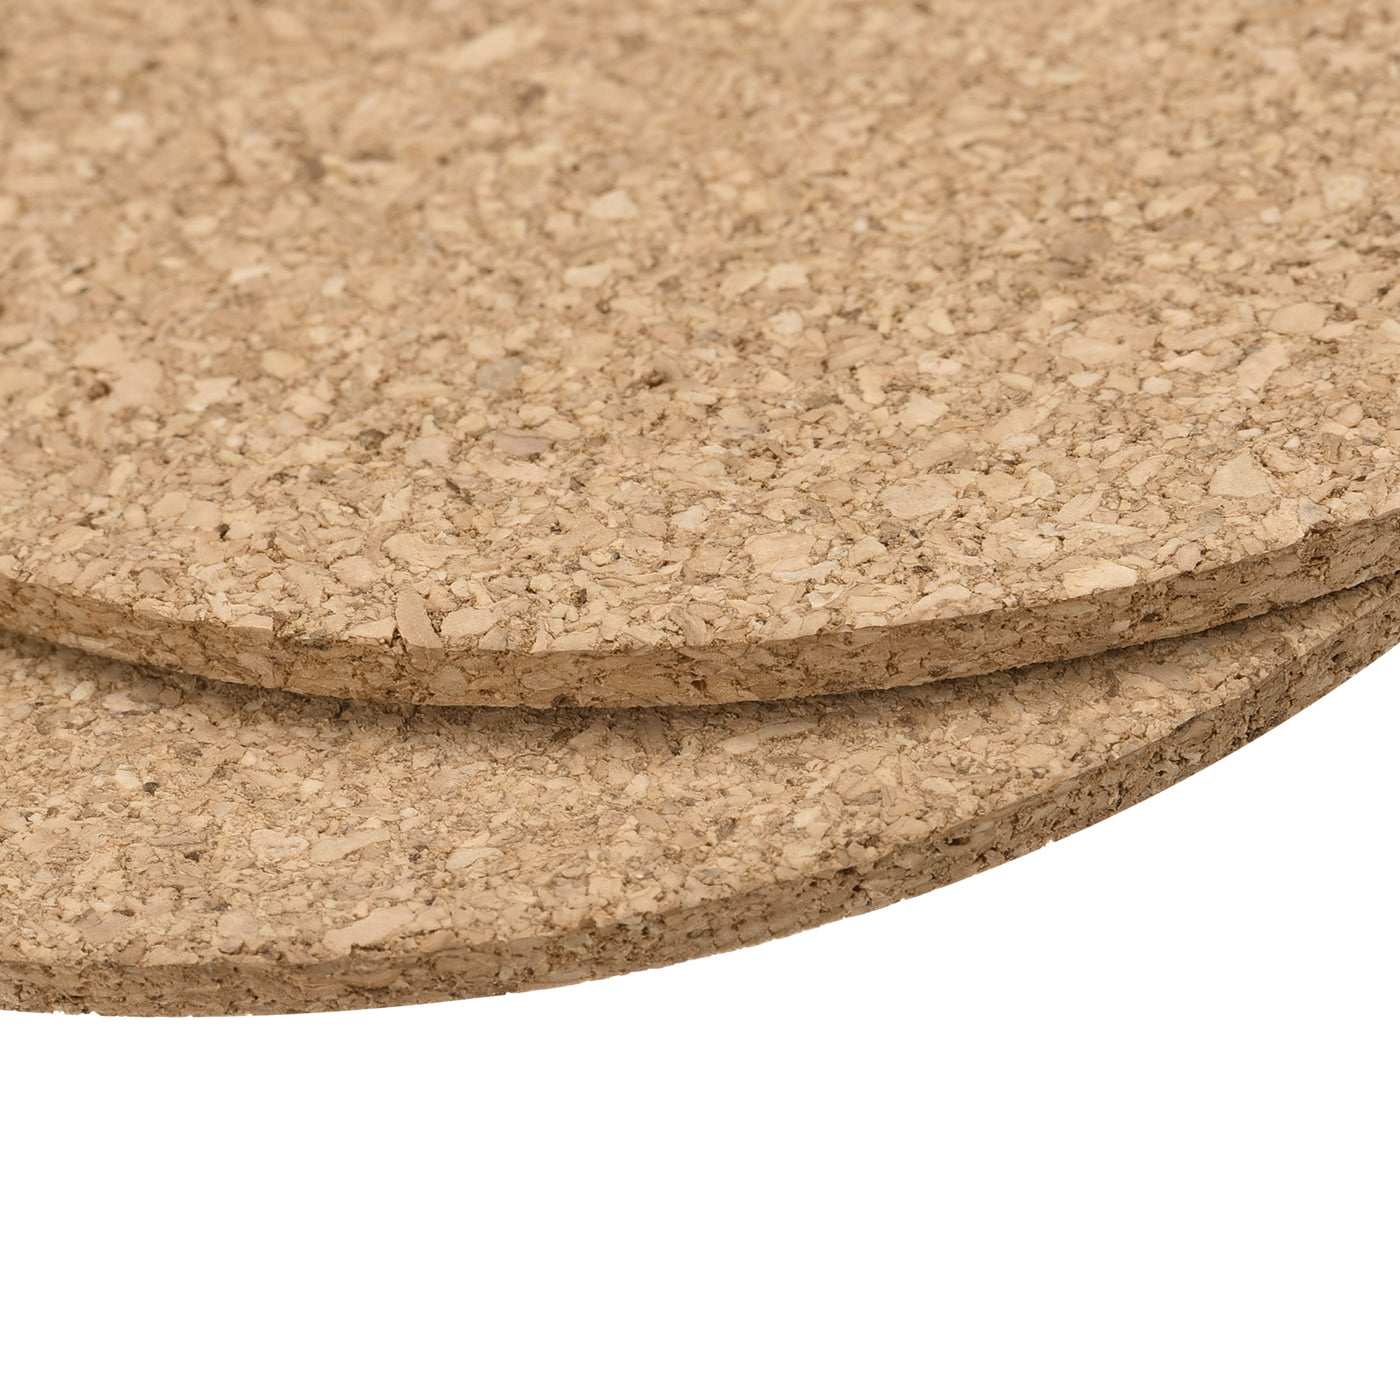 uxcell Uxcell 100mm(3.94") Round Coasters 3mm Thick Cork Cup Mat Pad for Tableware 20pcs